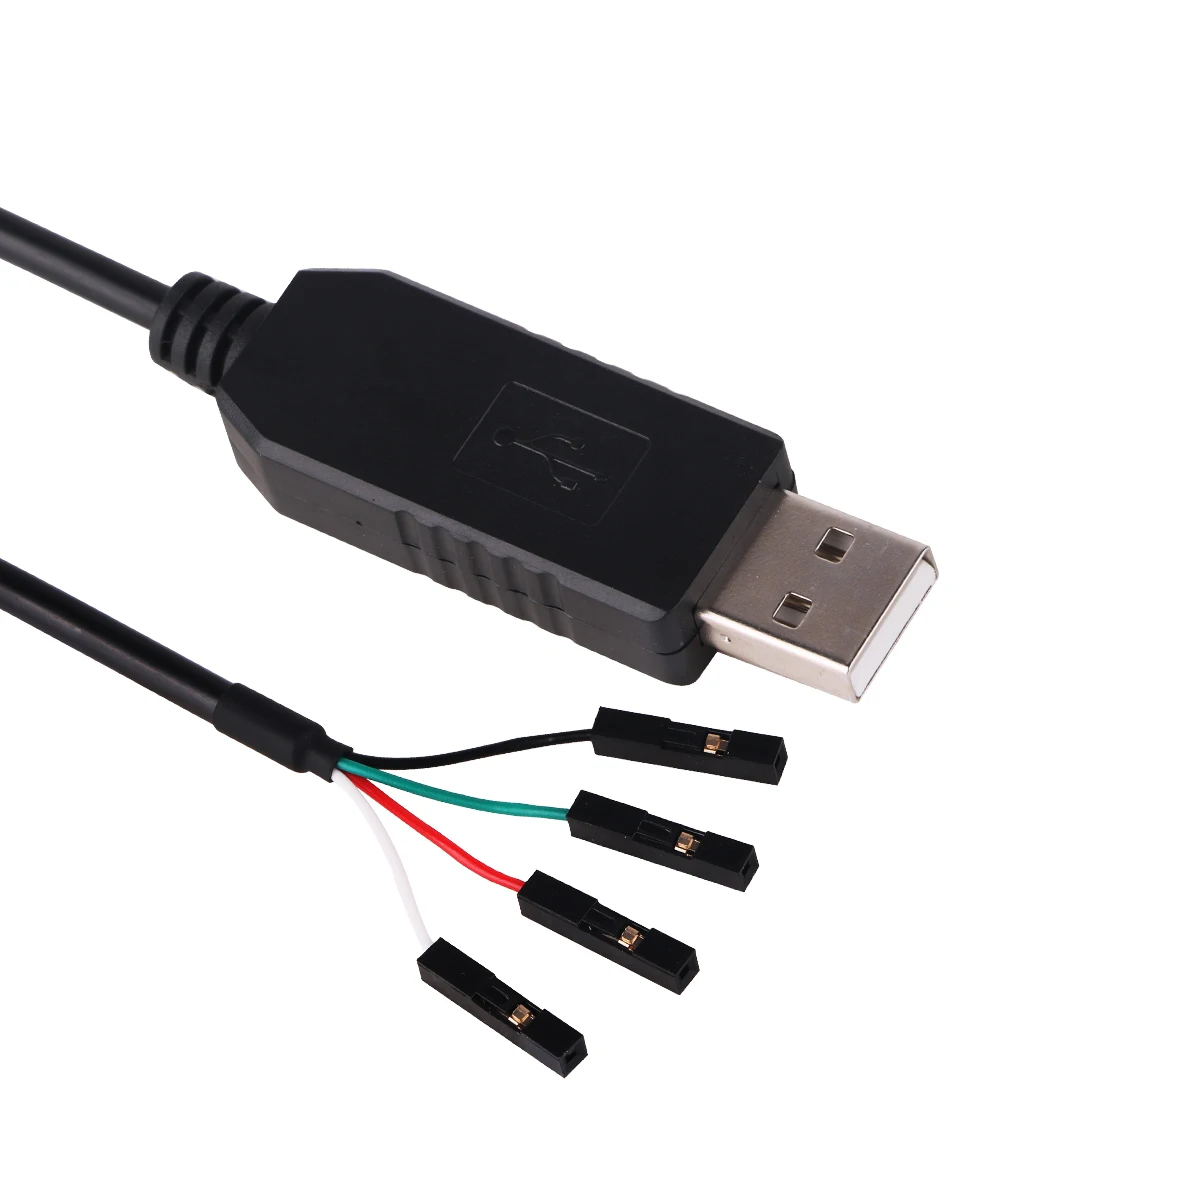 FTDI TTL-232R TTL TO USB 4-Way SIL,0.1” 2.54mm Pitch 4 Pin Terminal Block Adapter Connector Serial Converter Cable ttl 232r 5v 3 3v ftdi chip usb to 3pin wire end ttl uart level serial adapter cable